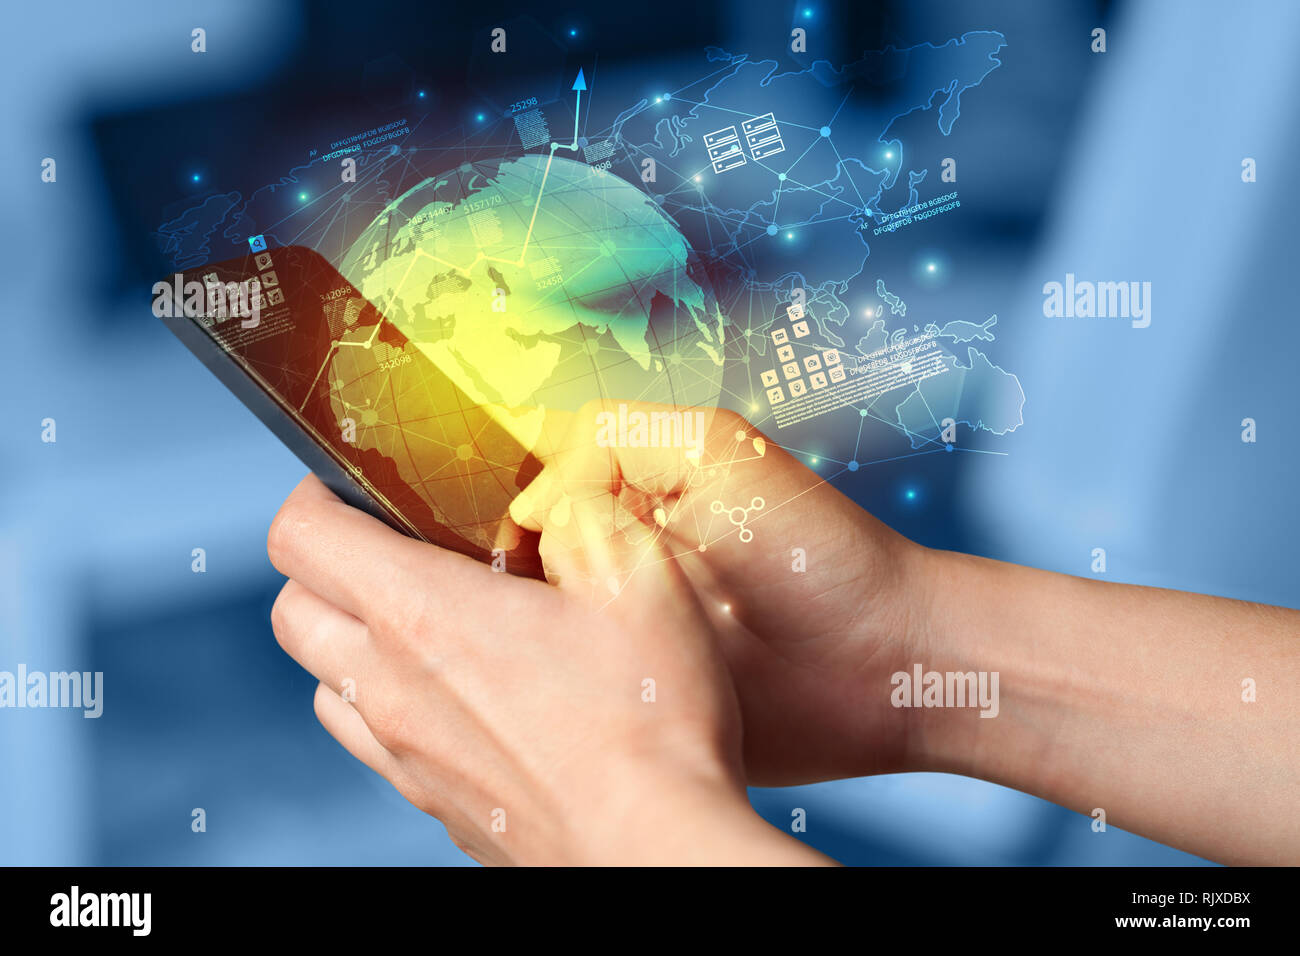 Hand using phone with global reports and stock market change concept  Stock Photo